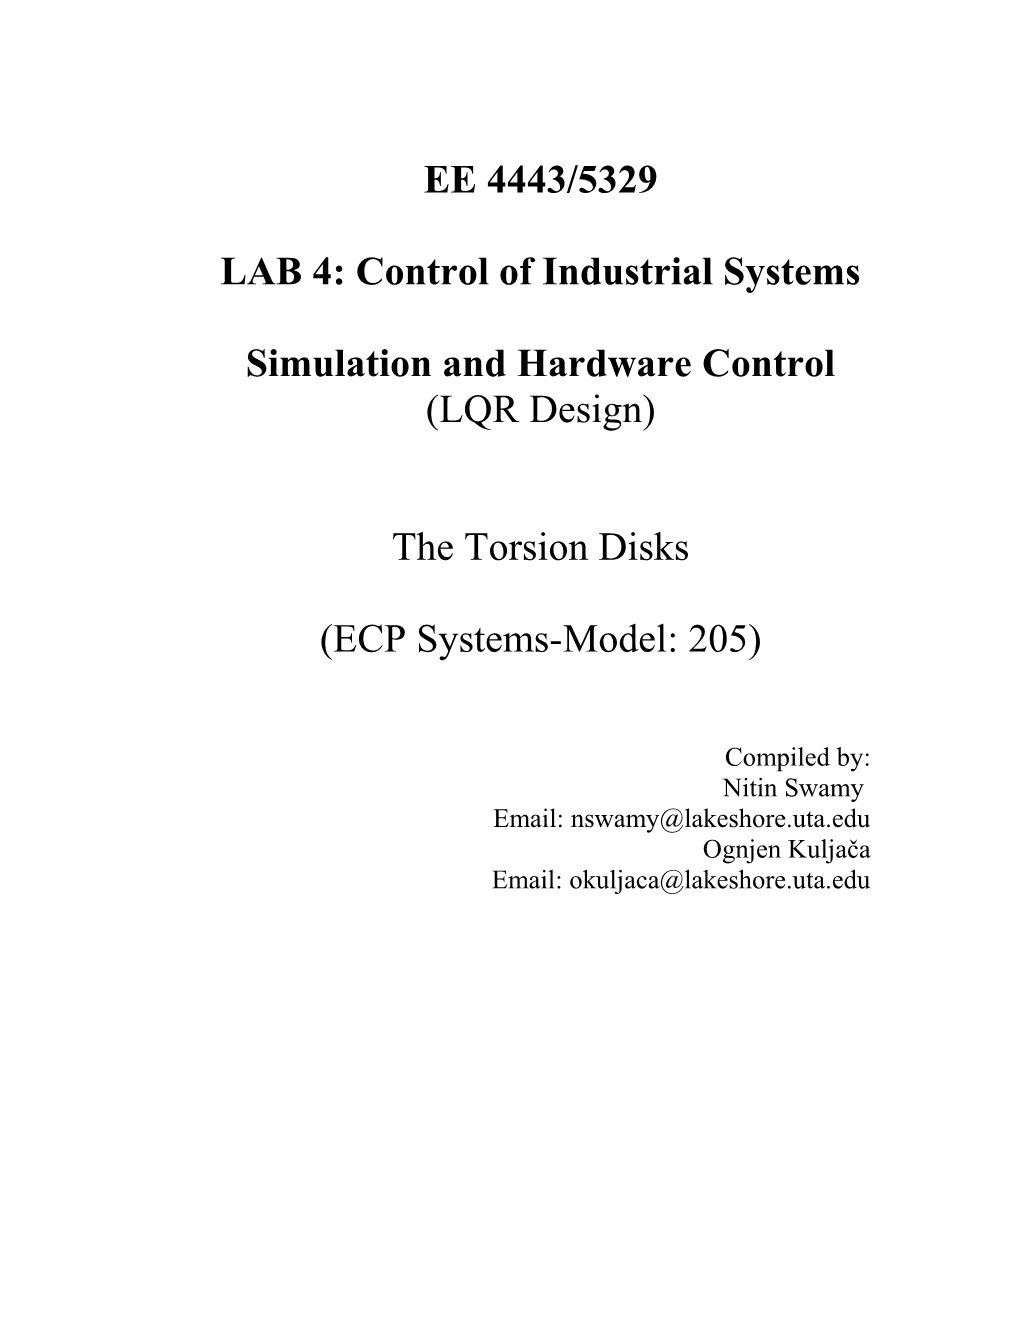 LAB 4: Control of Industrial Systems